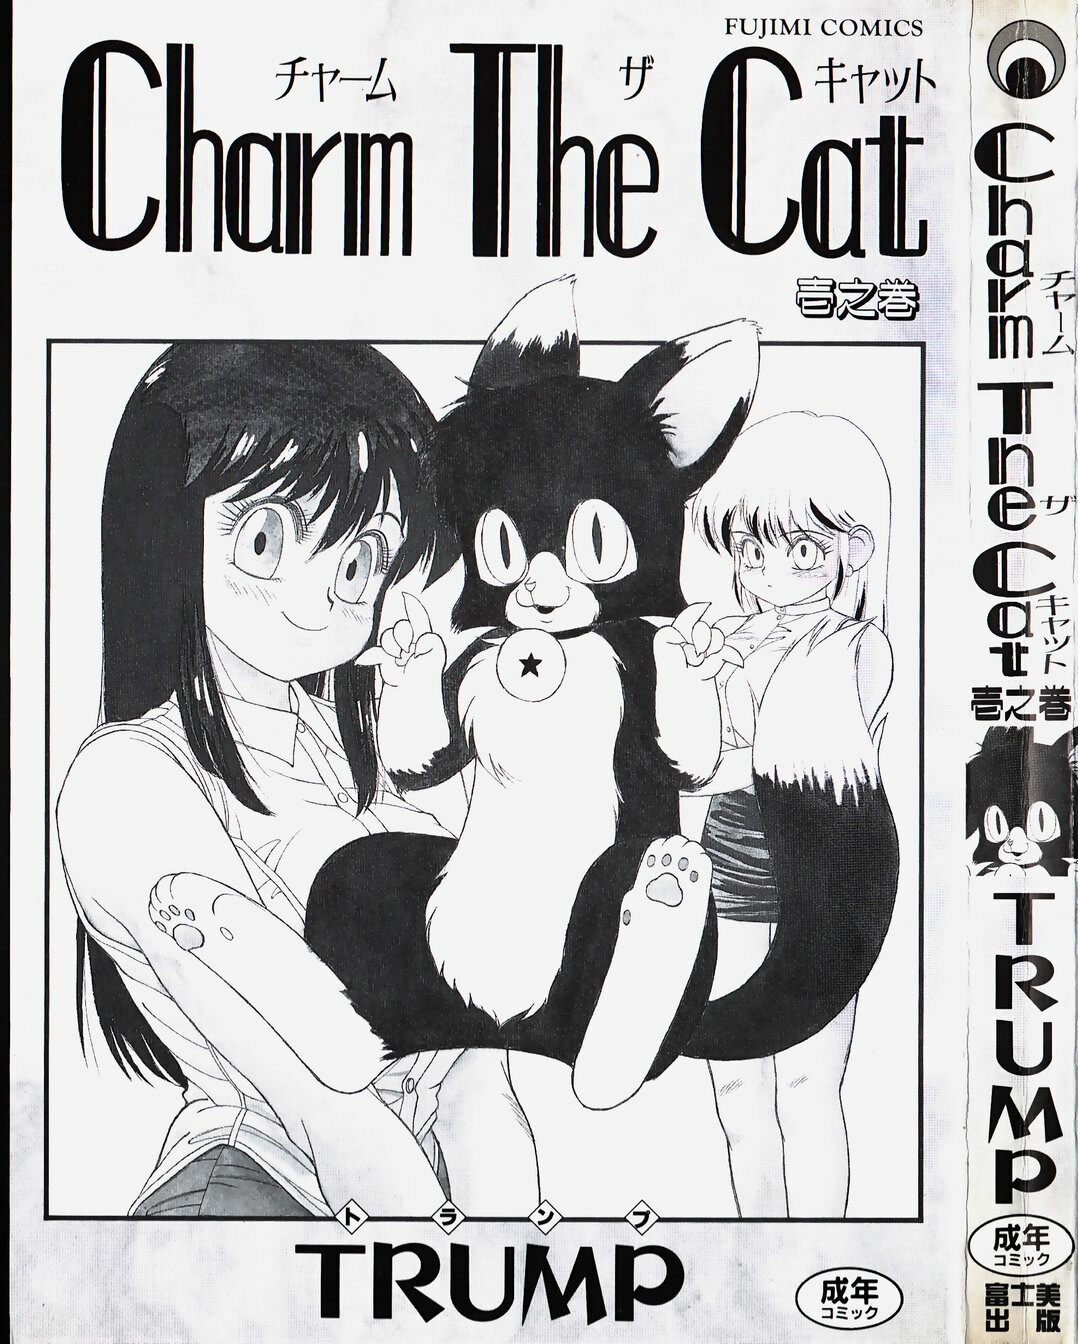 [Trump] Charm The Cat page 3 full